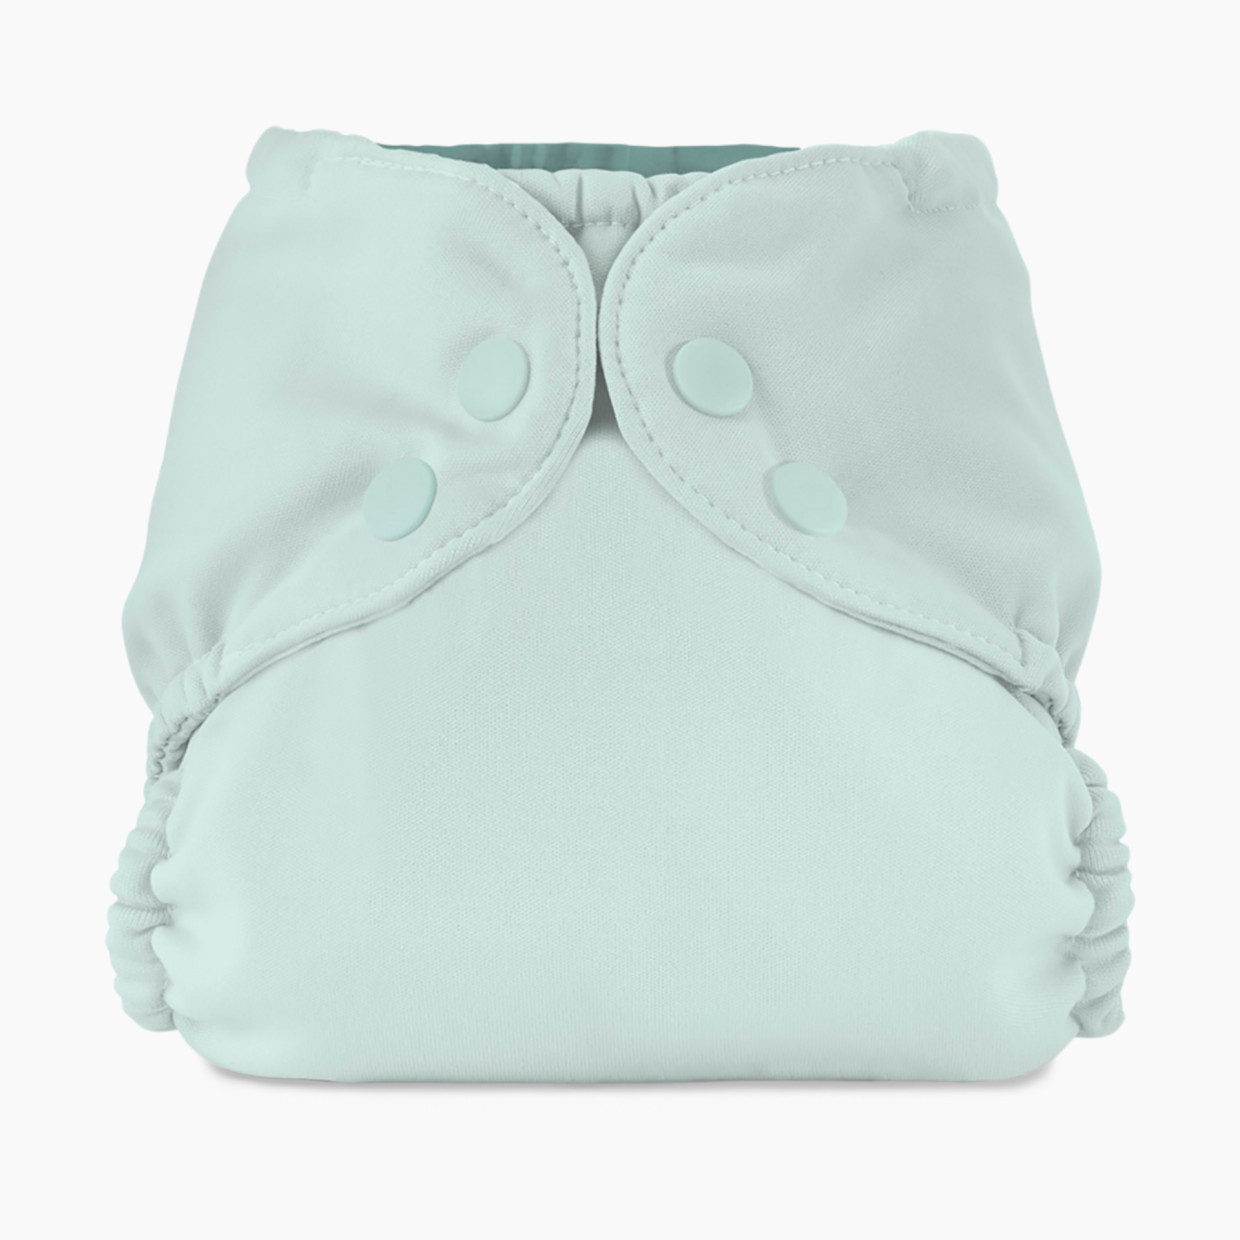 Esembly Recycled Diaper Cover (Outer) + Swim Diaper - Mist, Size 1 (7 ...